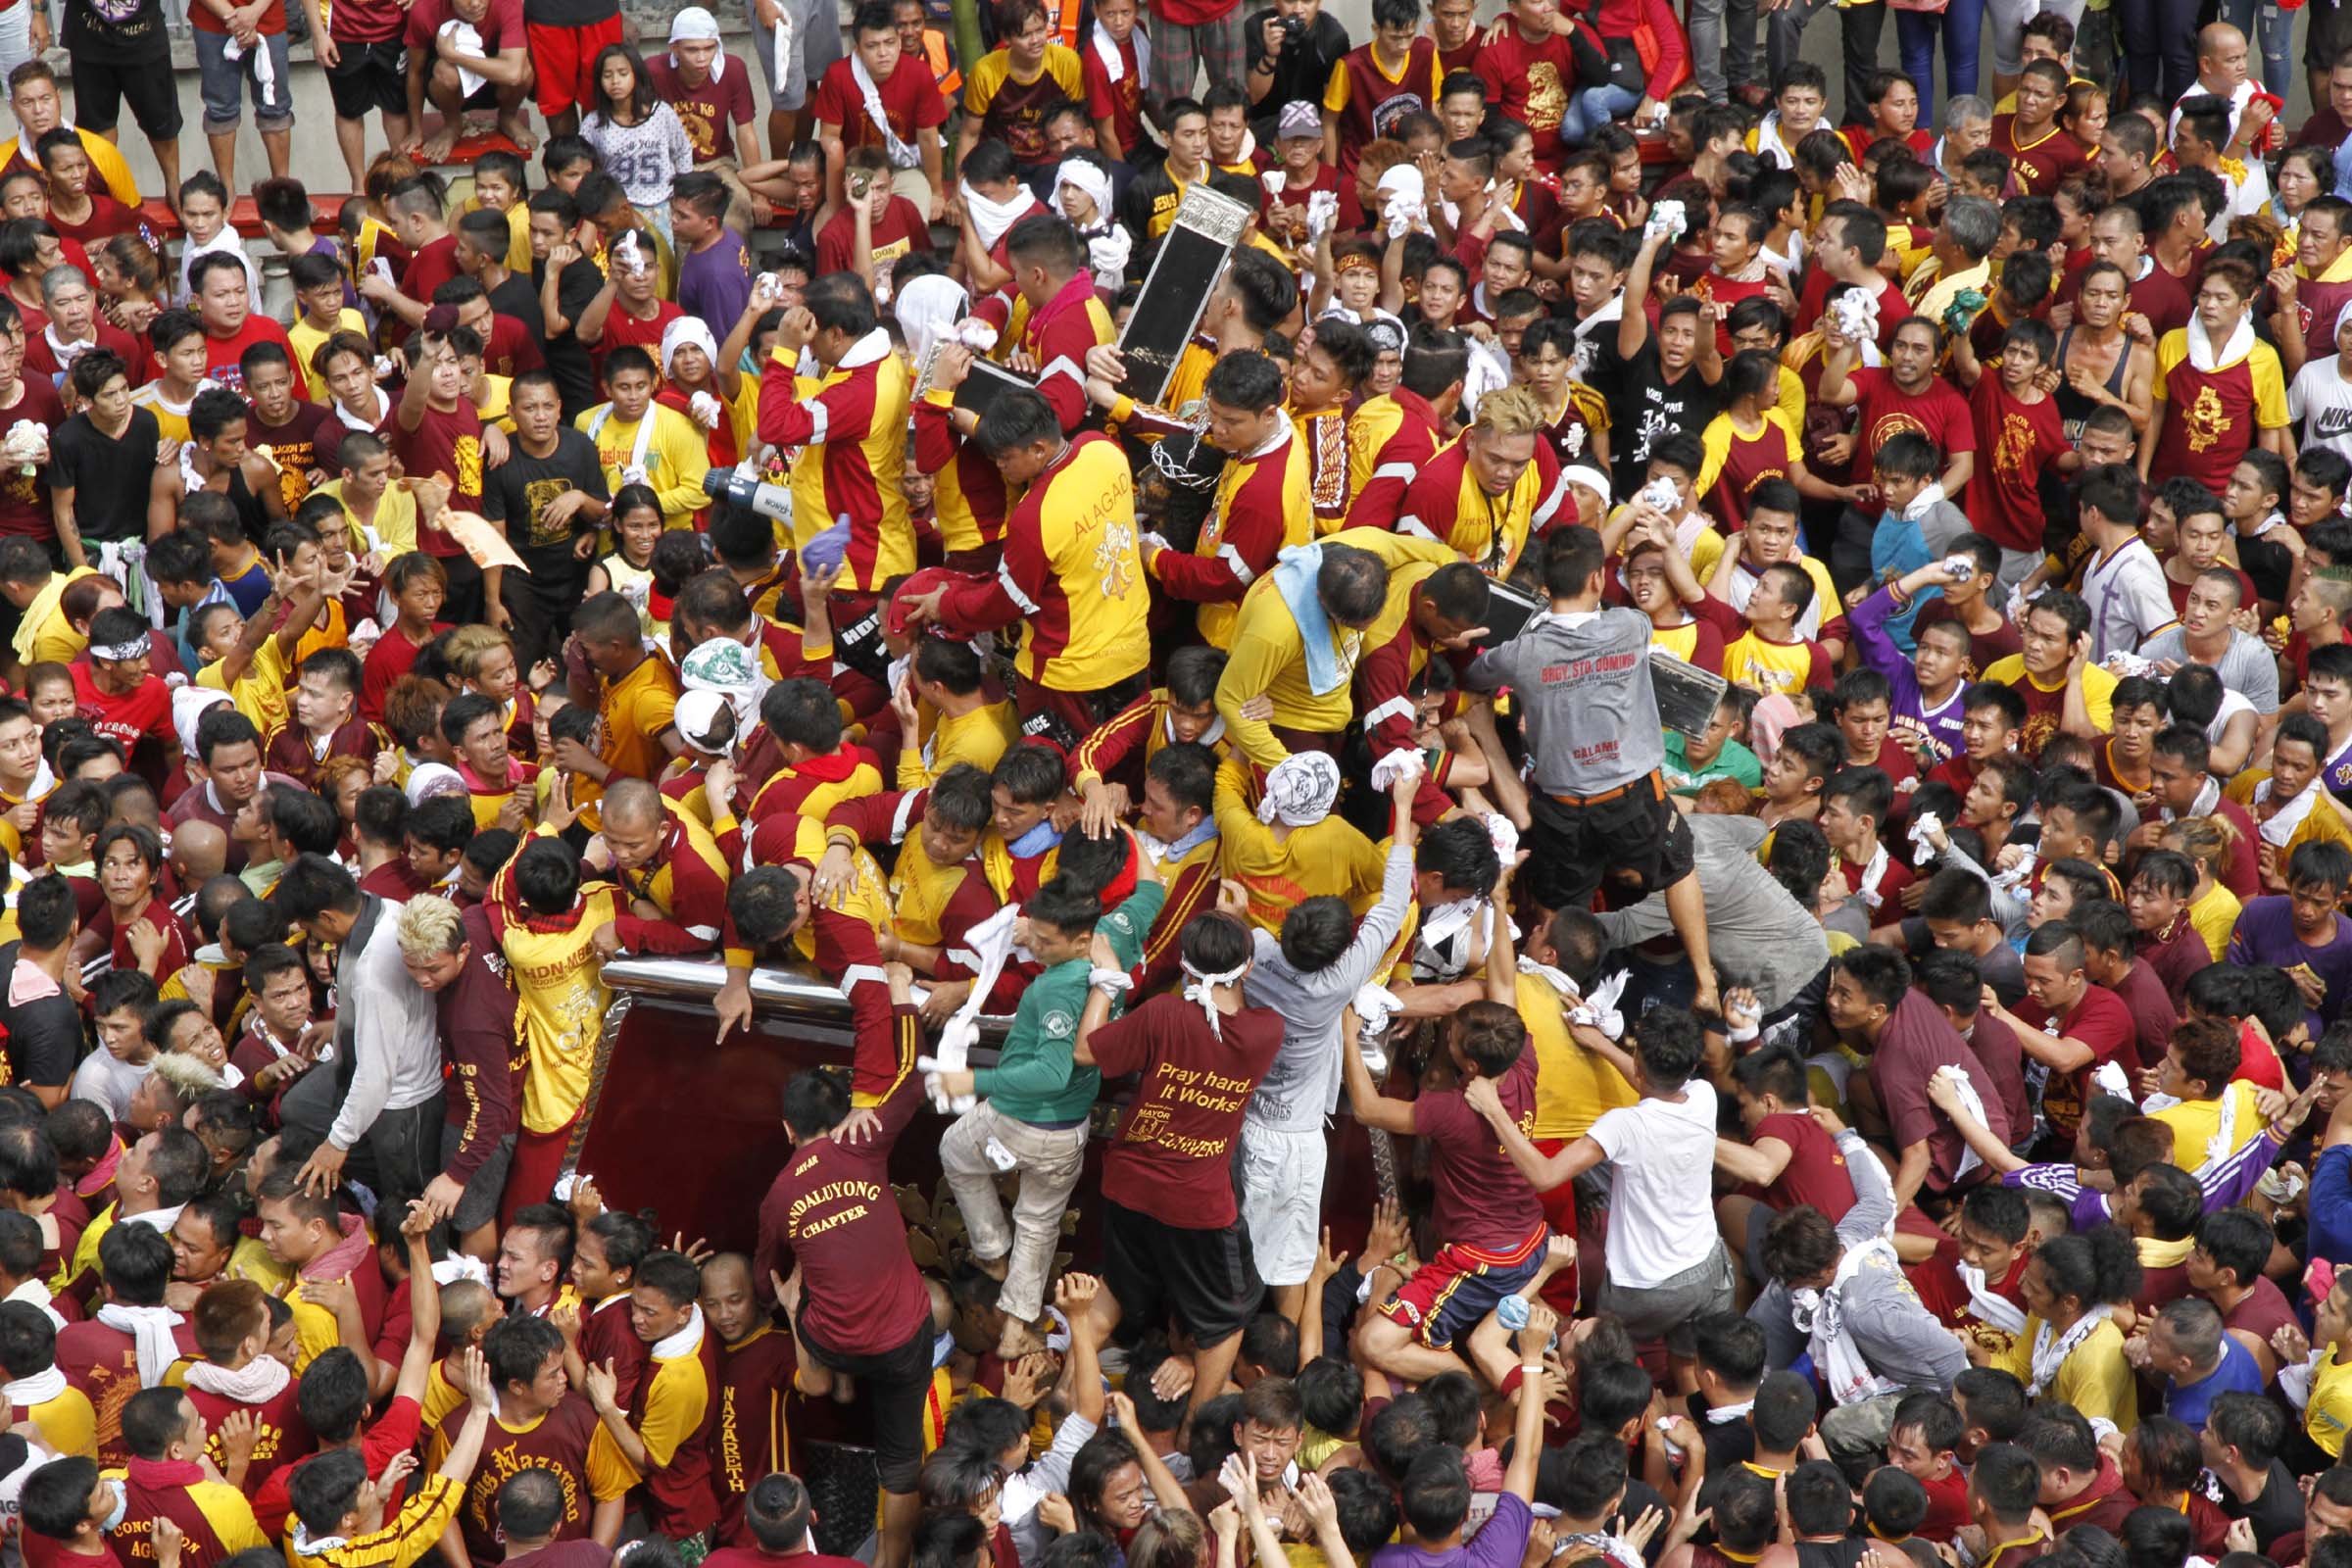 Devotees climb the carriage to touch the Black Nazarene